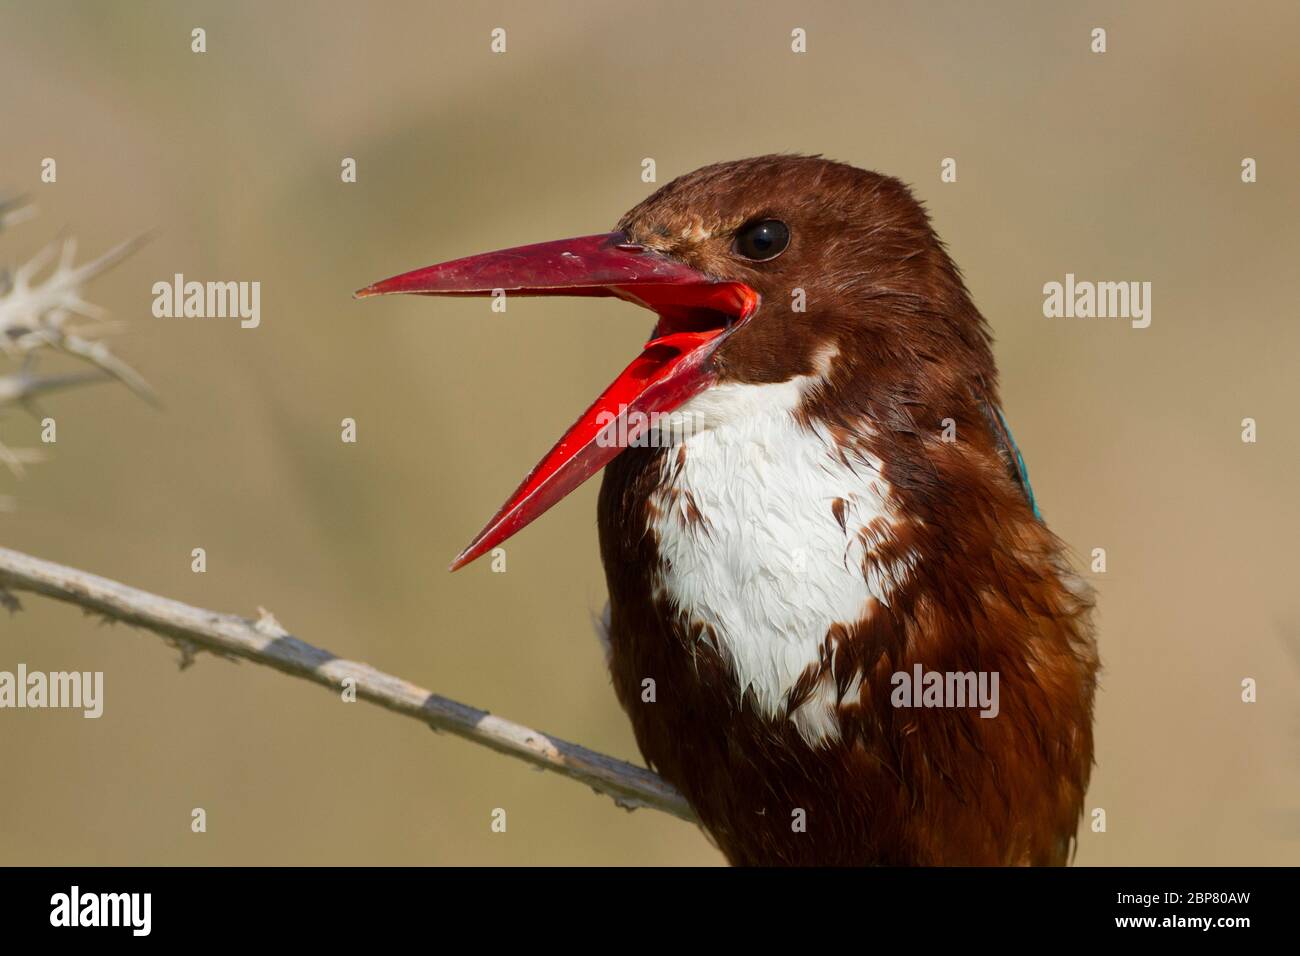 white-throated kingfisher (Halcyon smyrnensis) also known as the white-breasted kingfisher is a tree kingfisher, The adult has a bright blue back, win Stock Photo